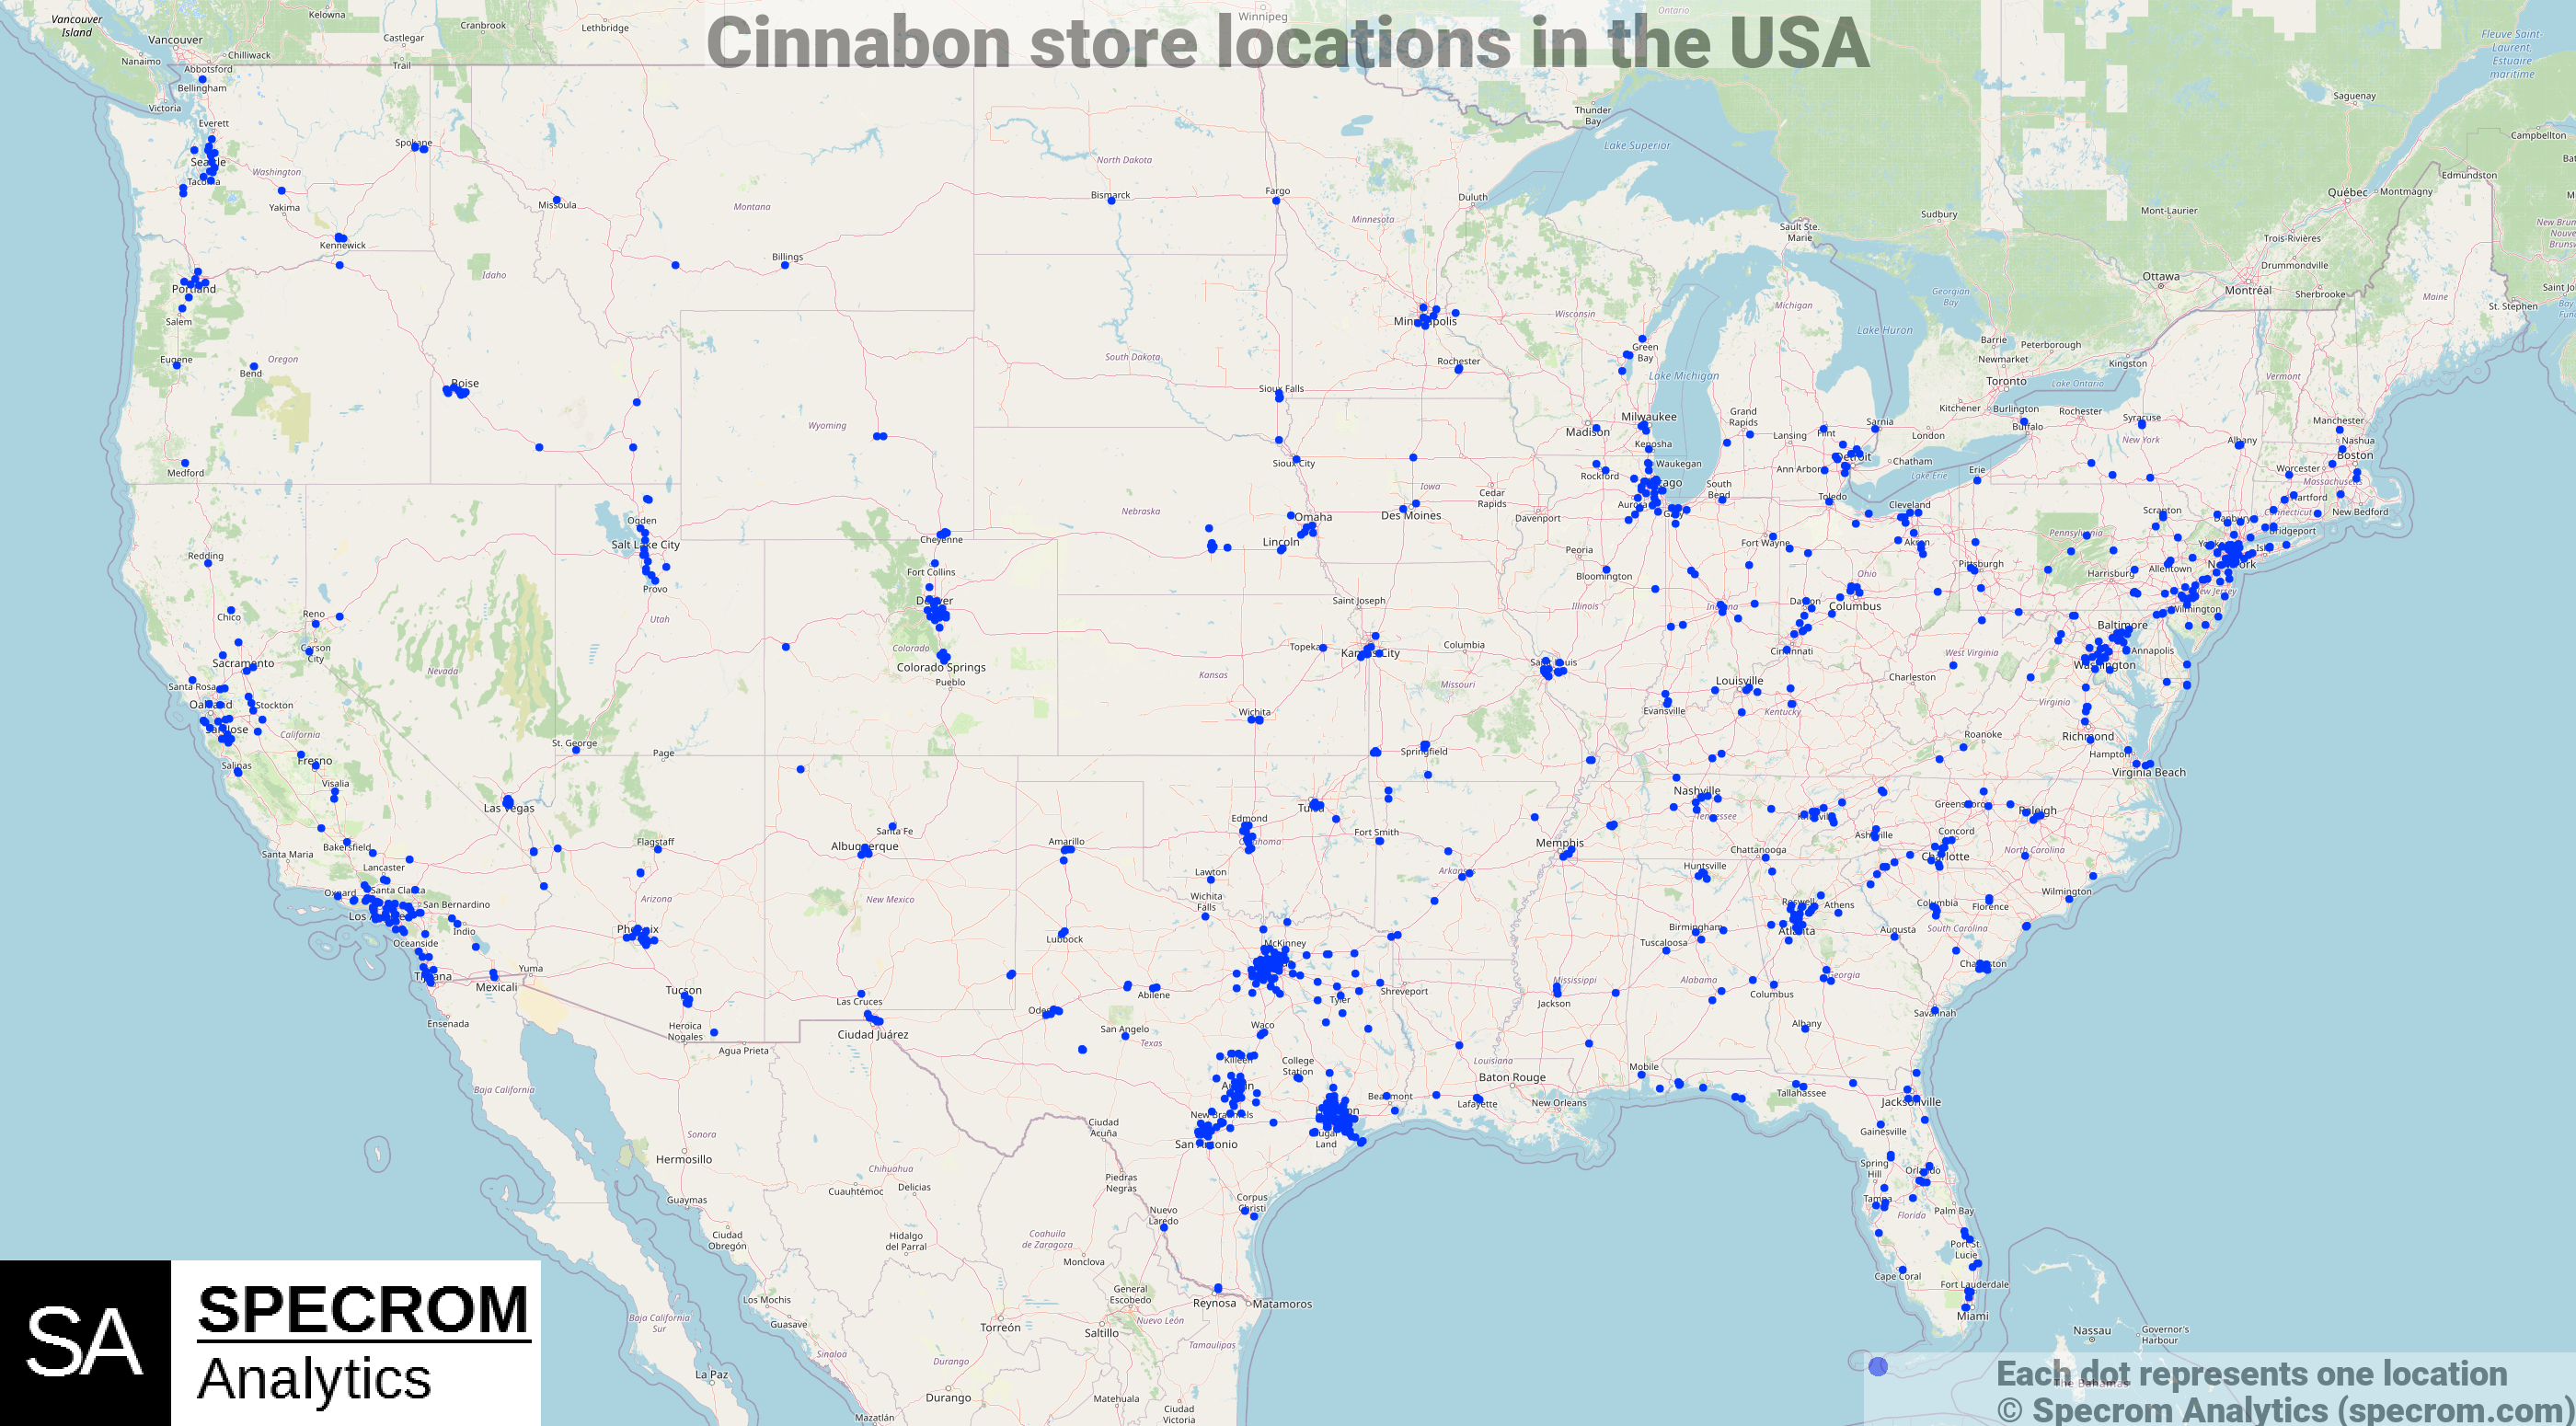 Cinnabon store locations in the USA